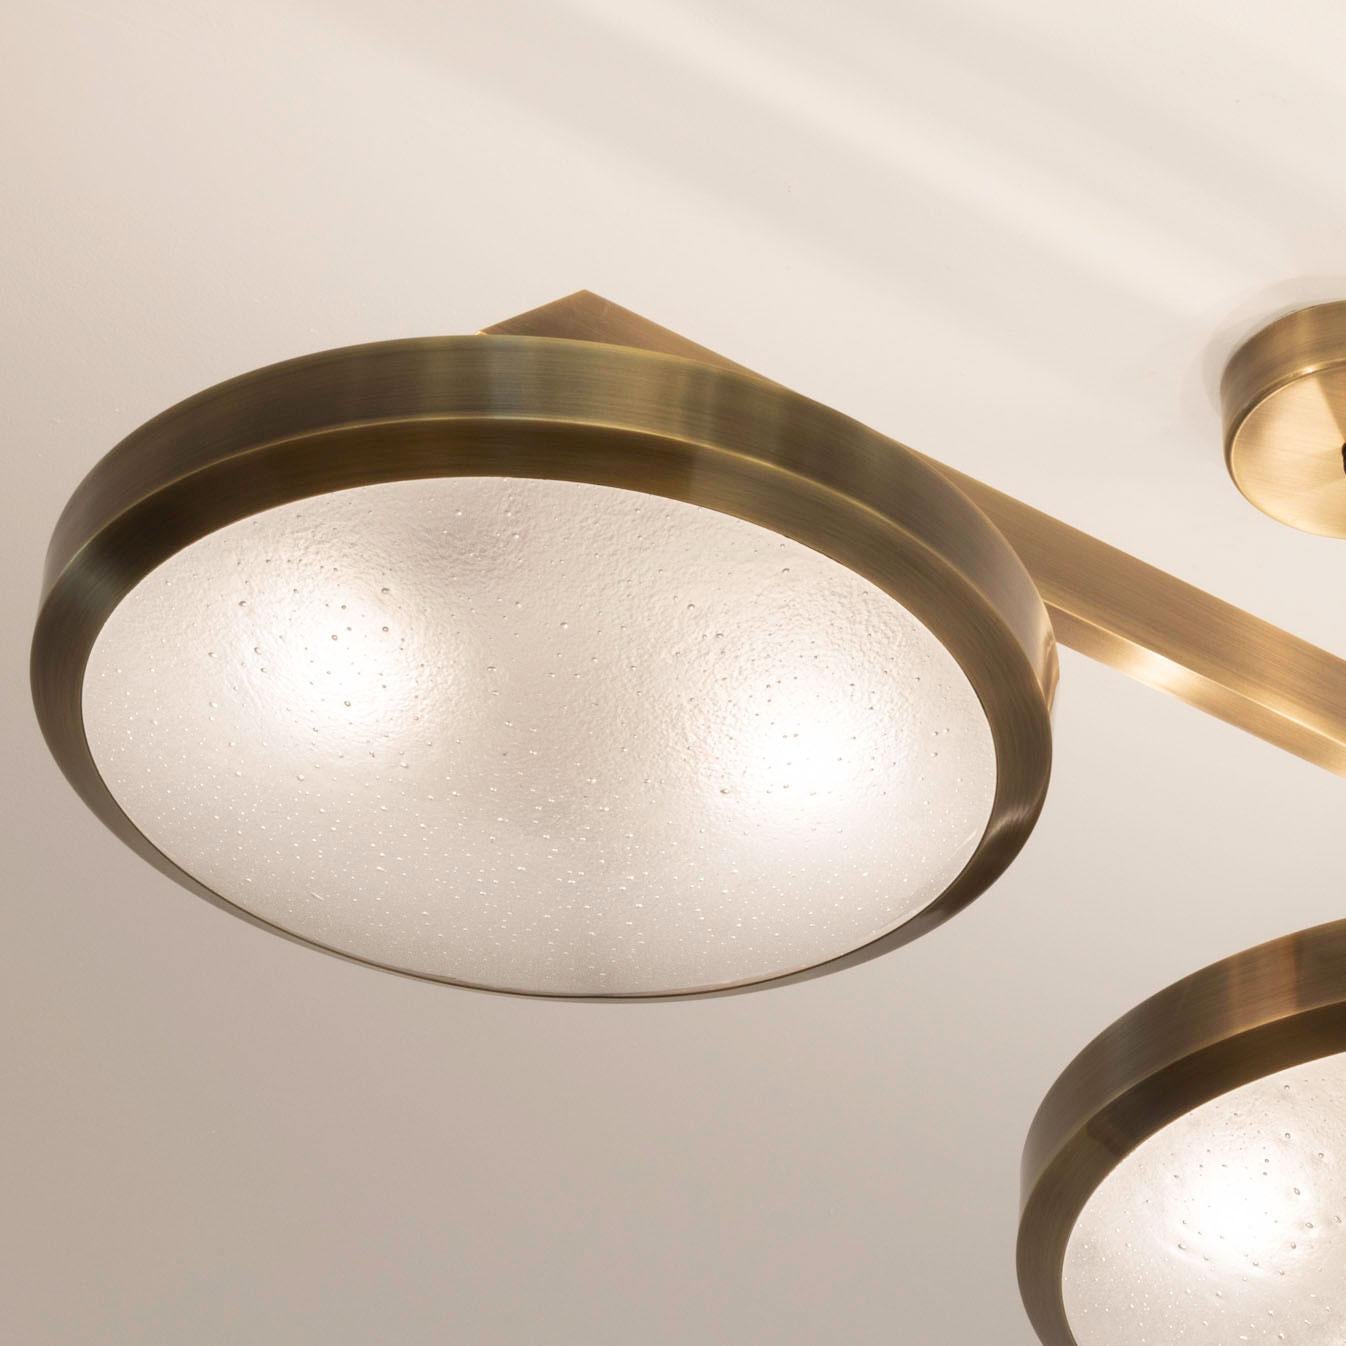 Zeta Ceiling Light by Gaspare Asaro - Satin Brass Finish For Sale 4